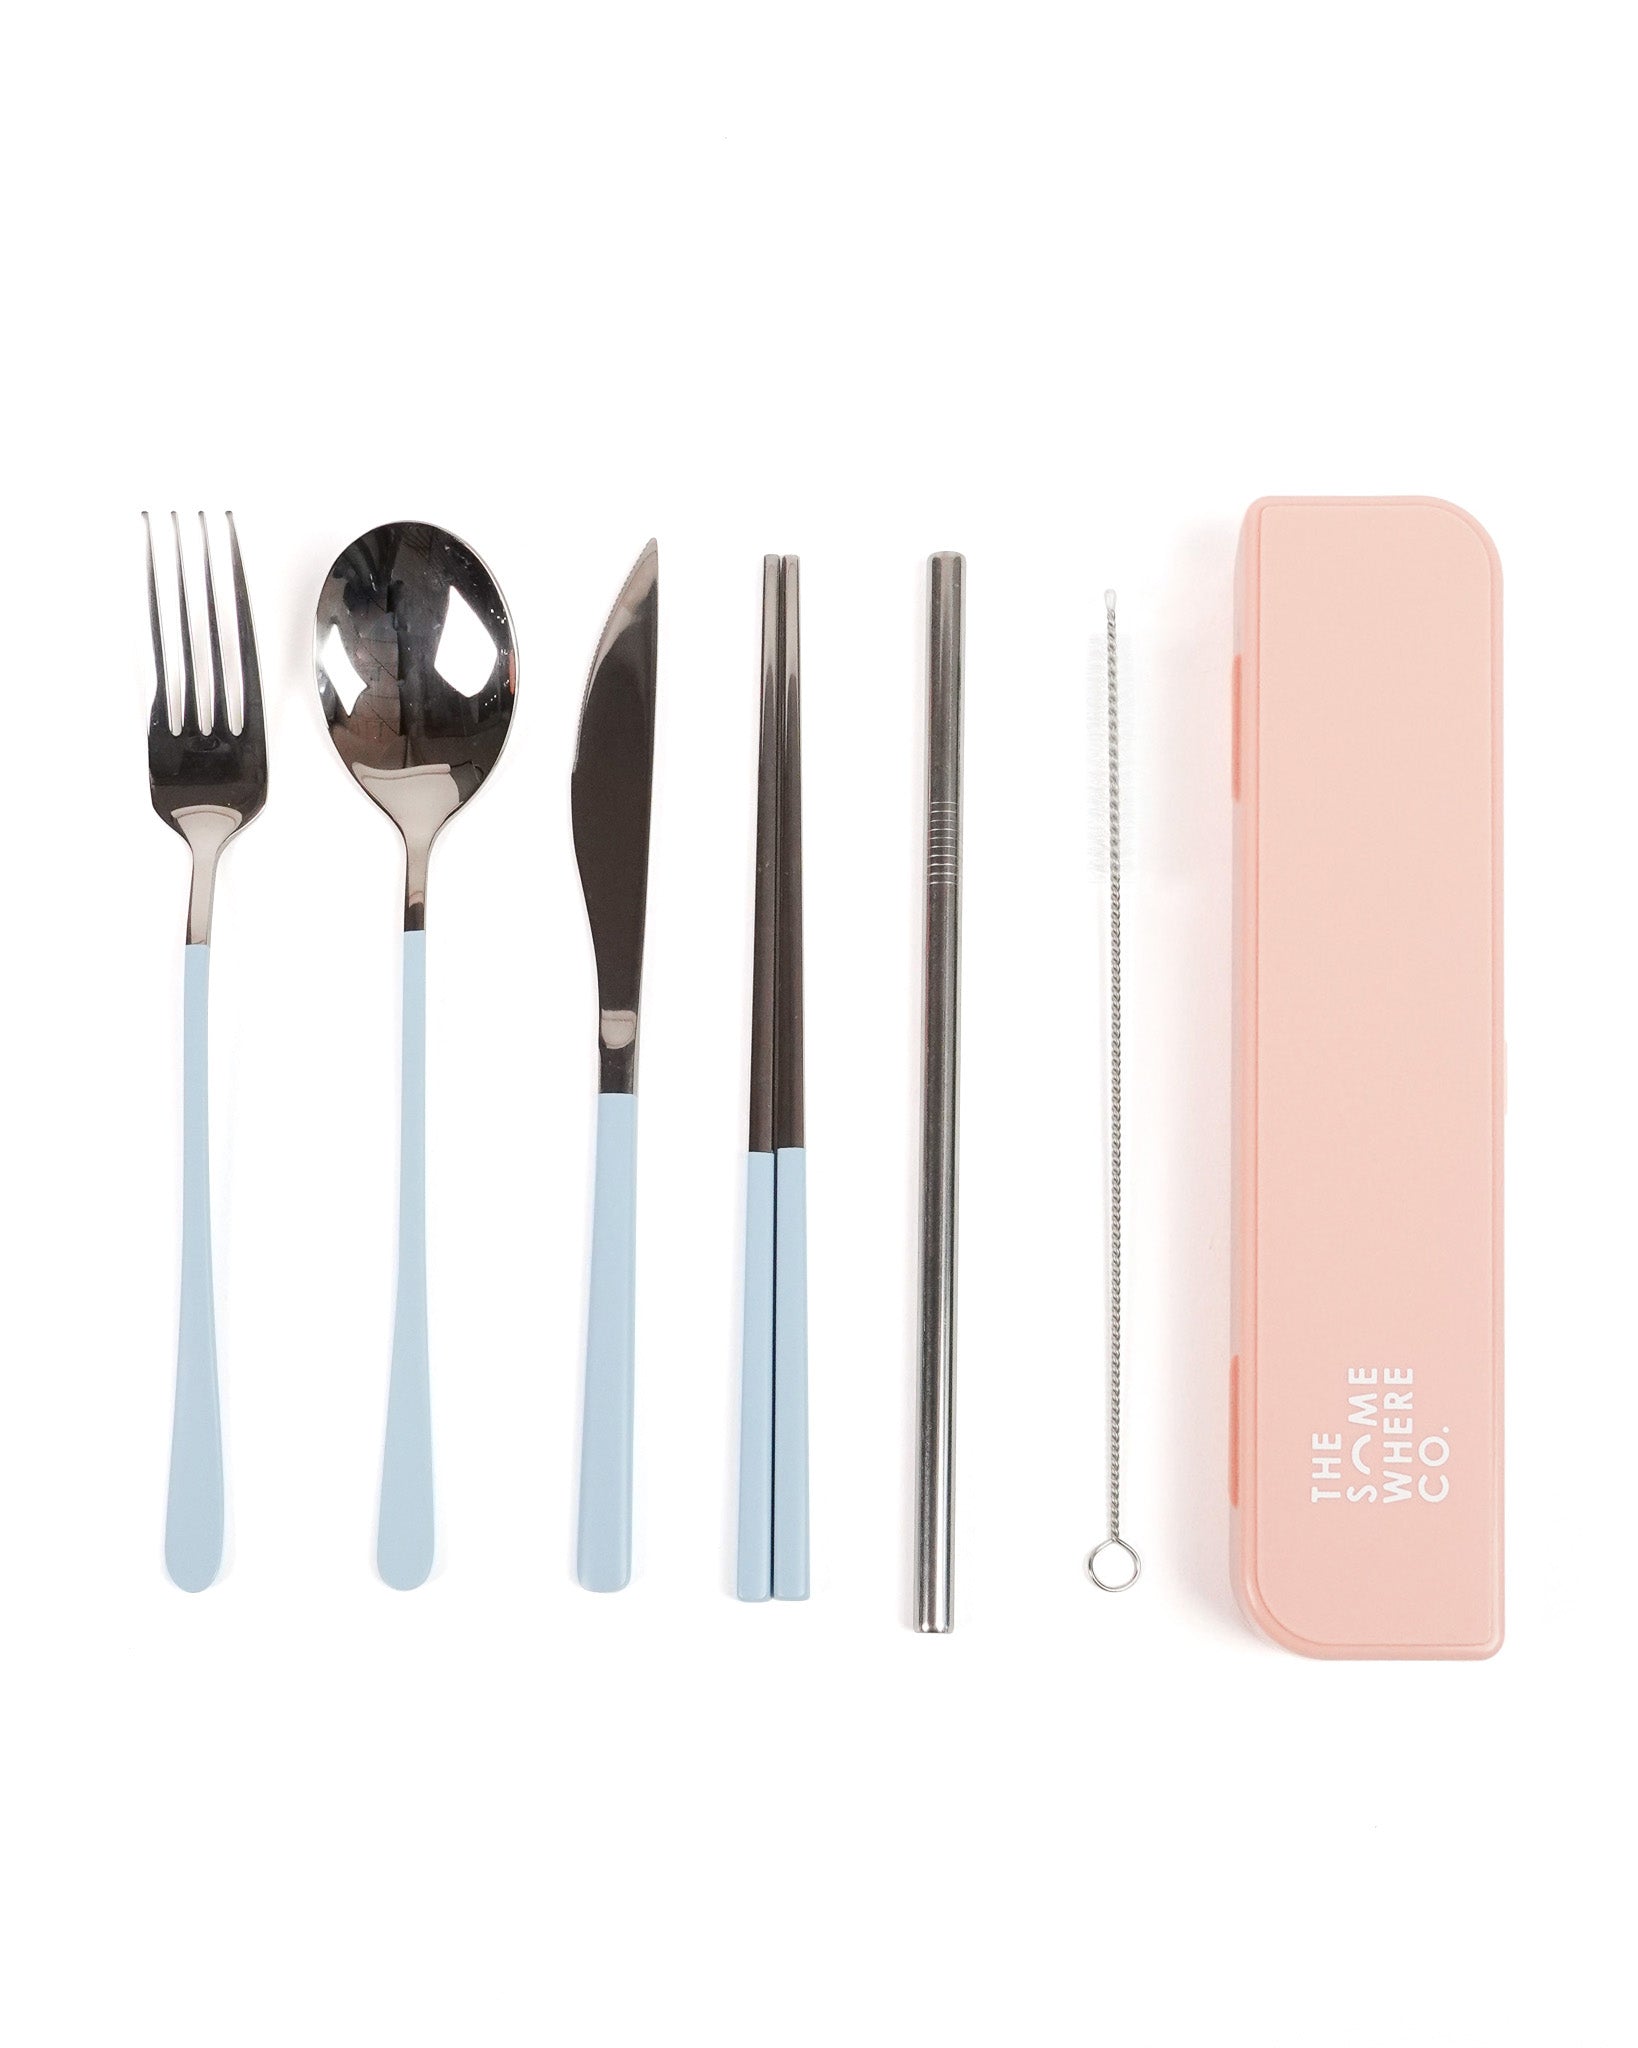 Cutlery Kit - Silver with Powder Blue Handle (PRE-ORDER)